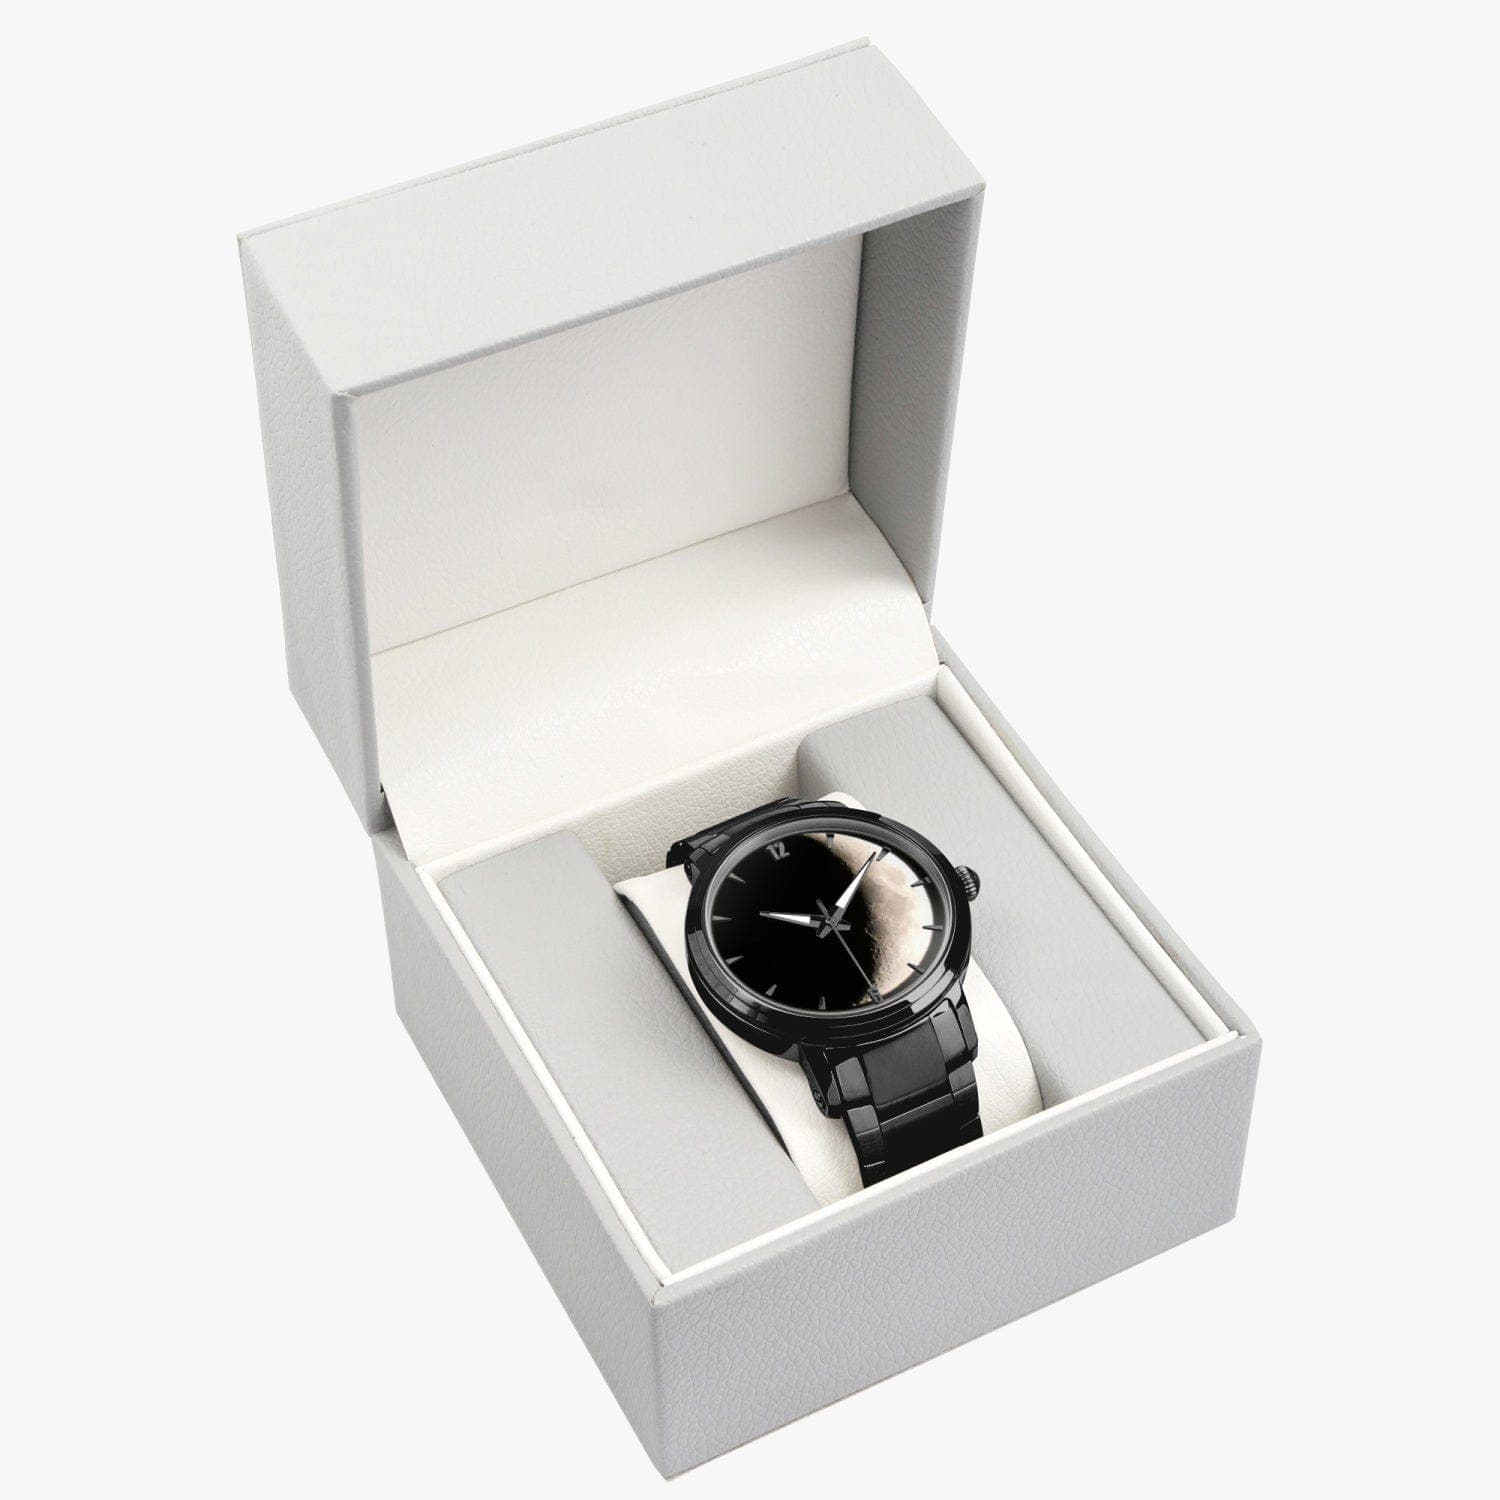 New Moon. New Steel Strap Automatic Watch (With Indicators). Designer watch by Sensus Studio design